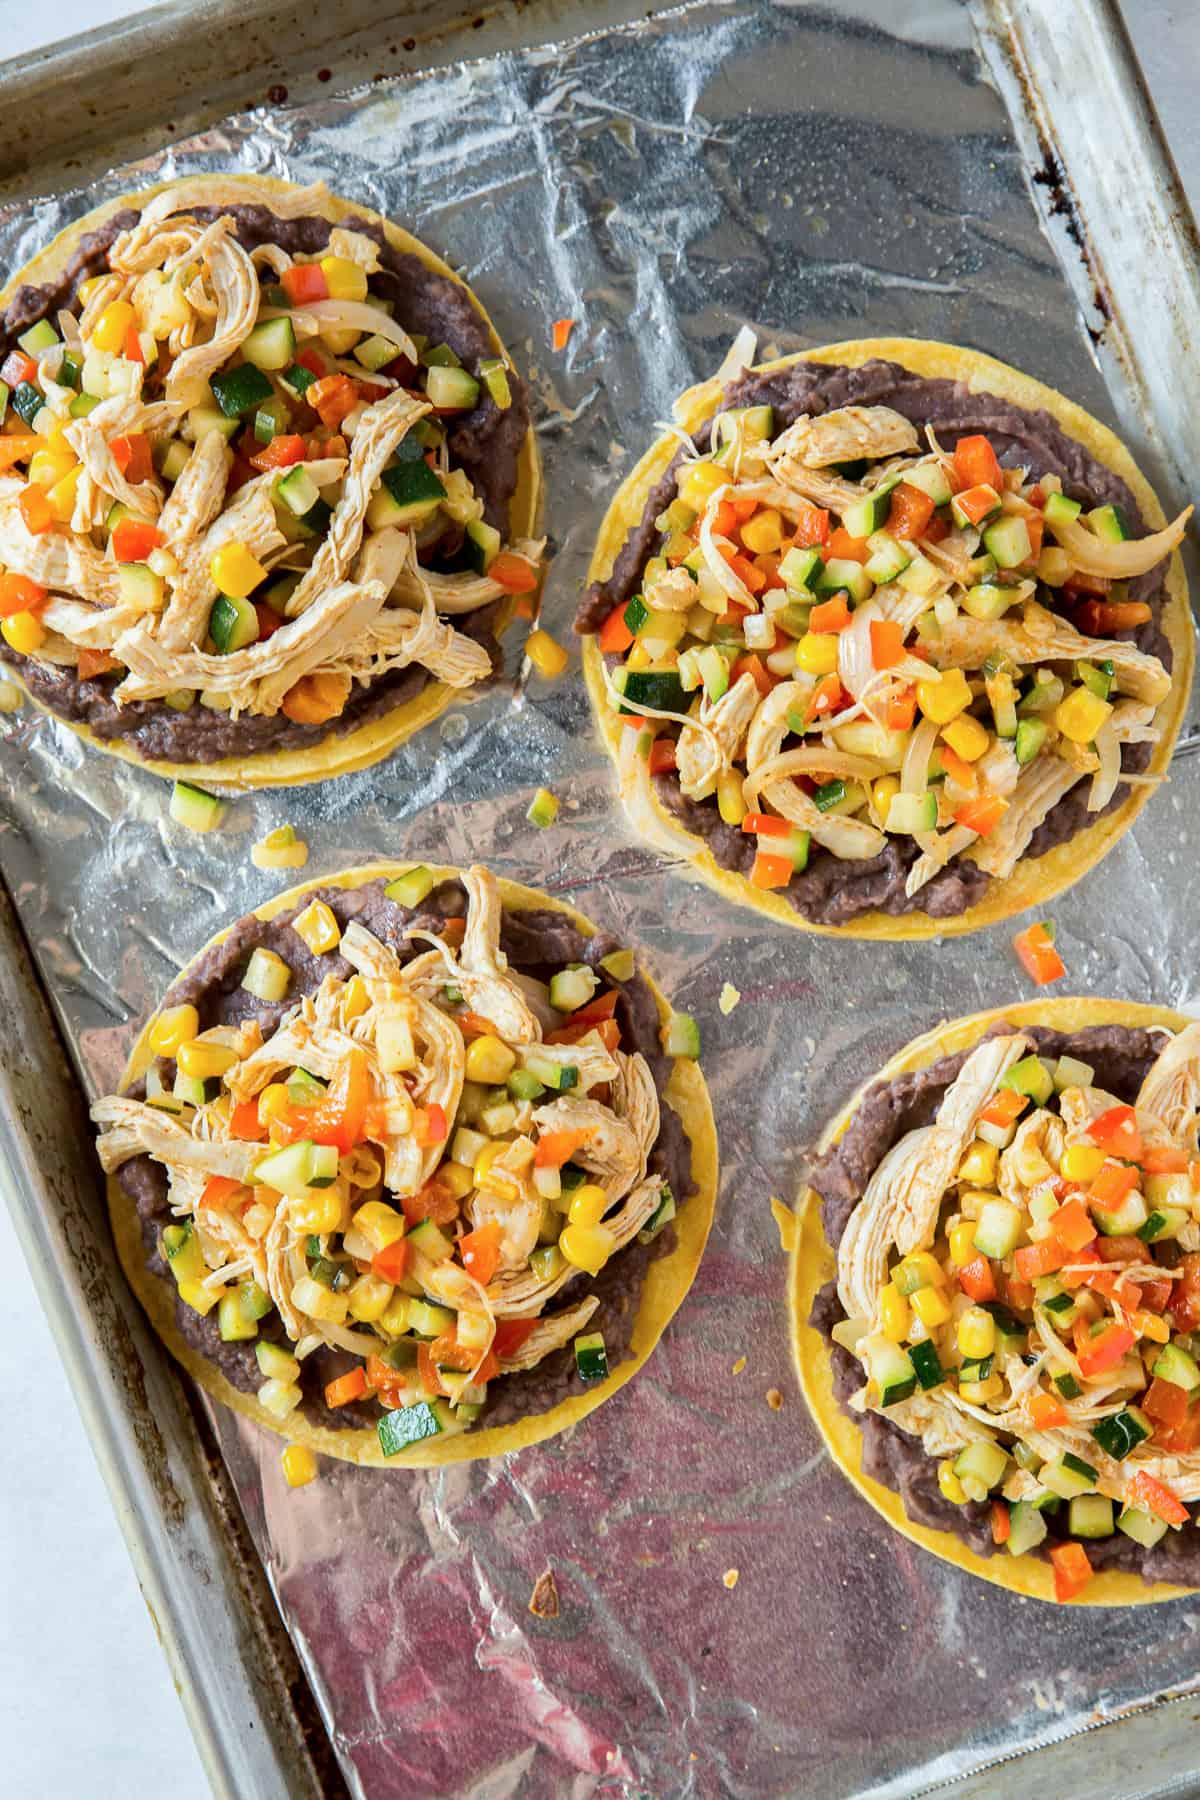 Tostadas on a baking sheet topped with chicken and vegetables.